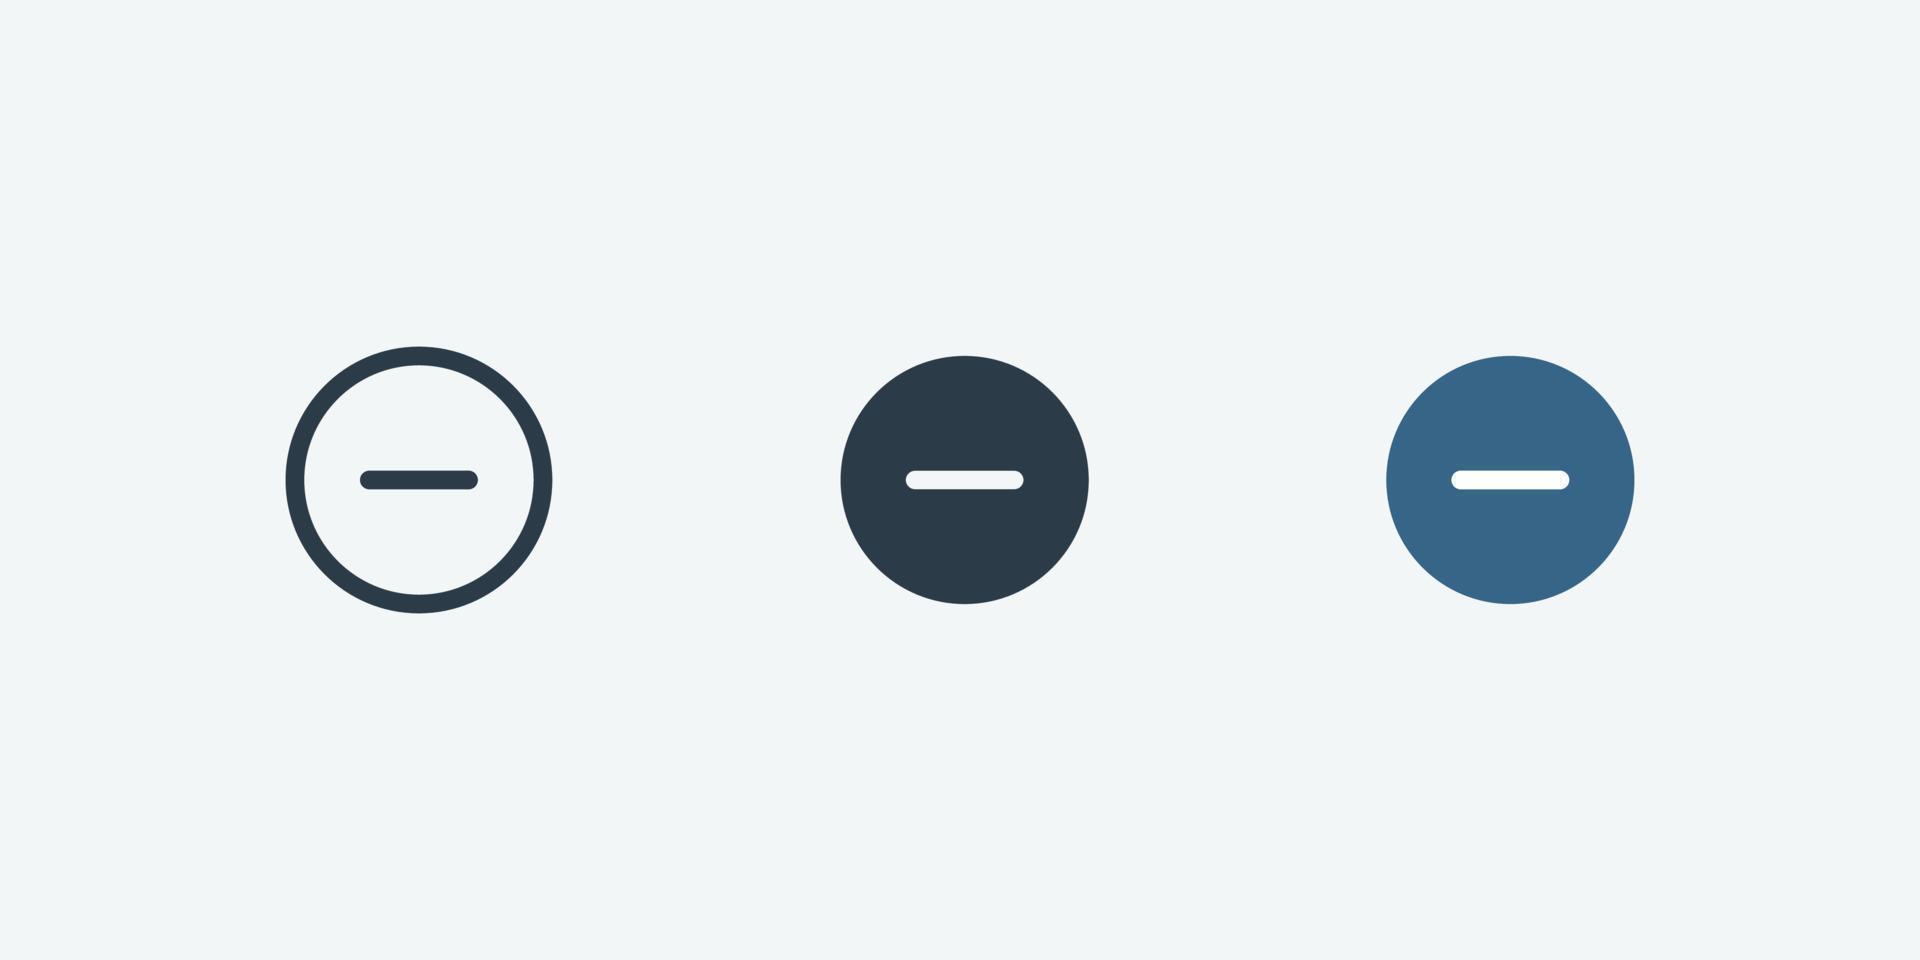 Minus vector icon isolated for web and app design interfaces